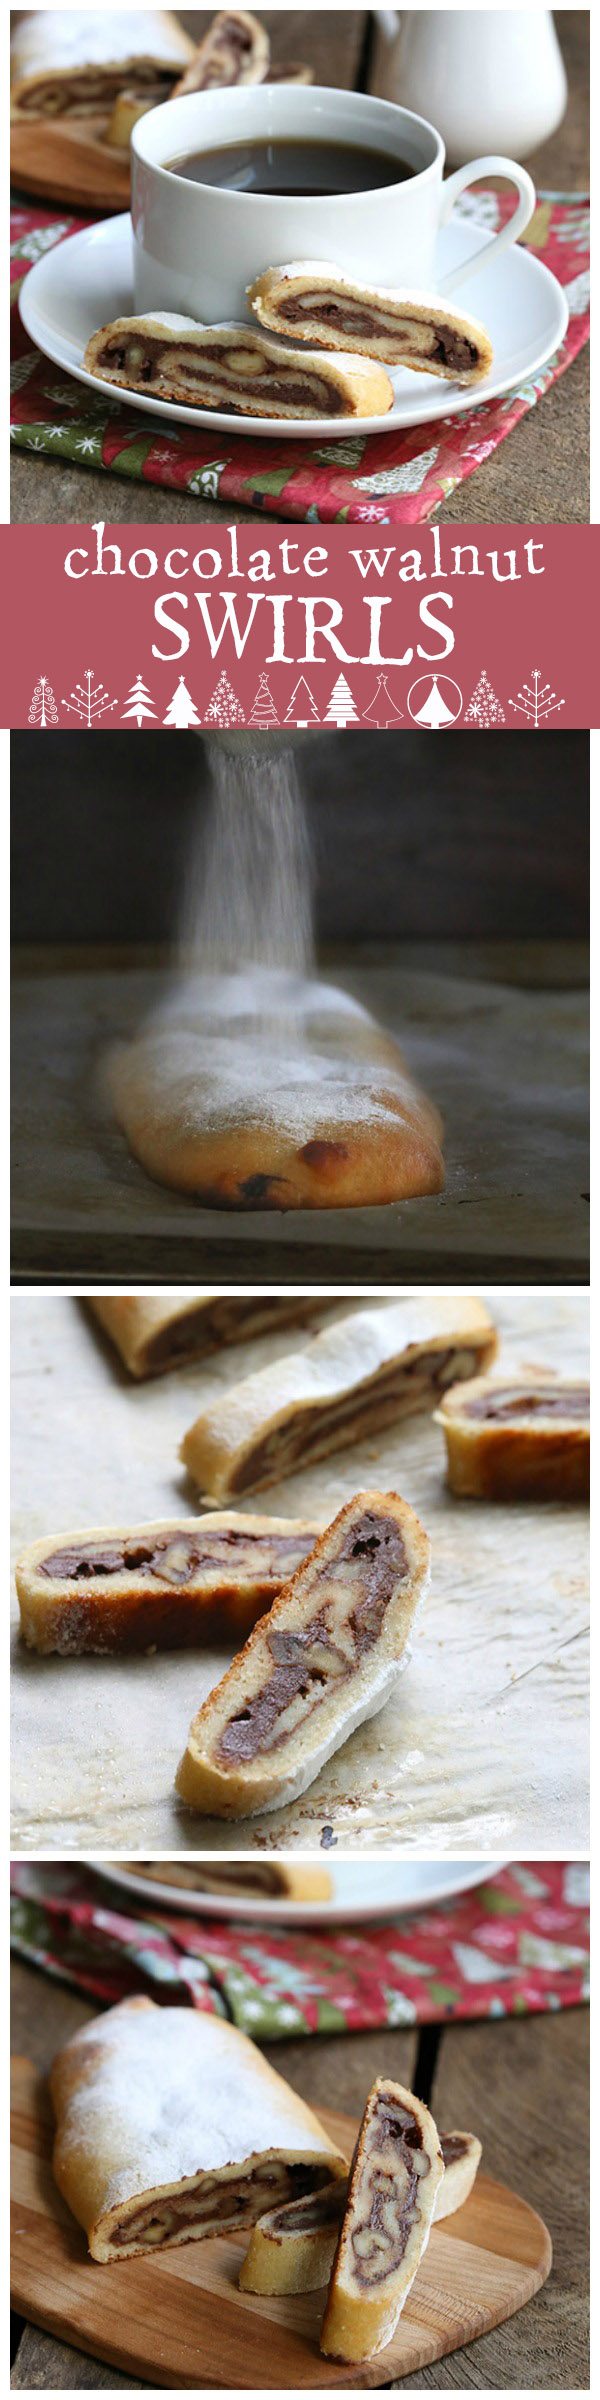 Tender almond flour pastry filled with chocolate and walnuts. It's like the low carb version of a chocolate croissant!